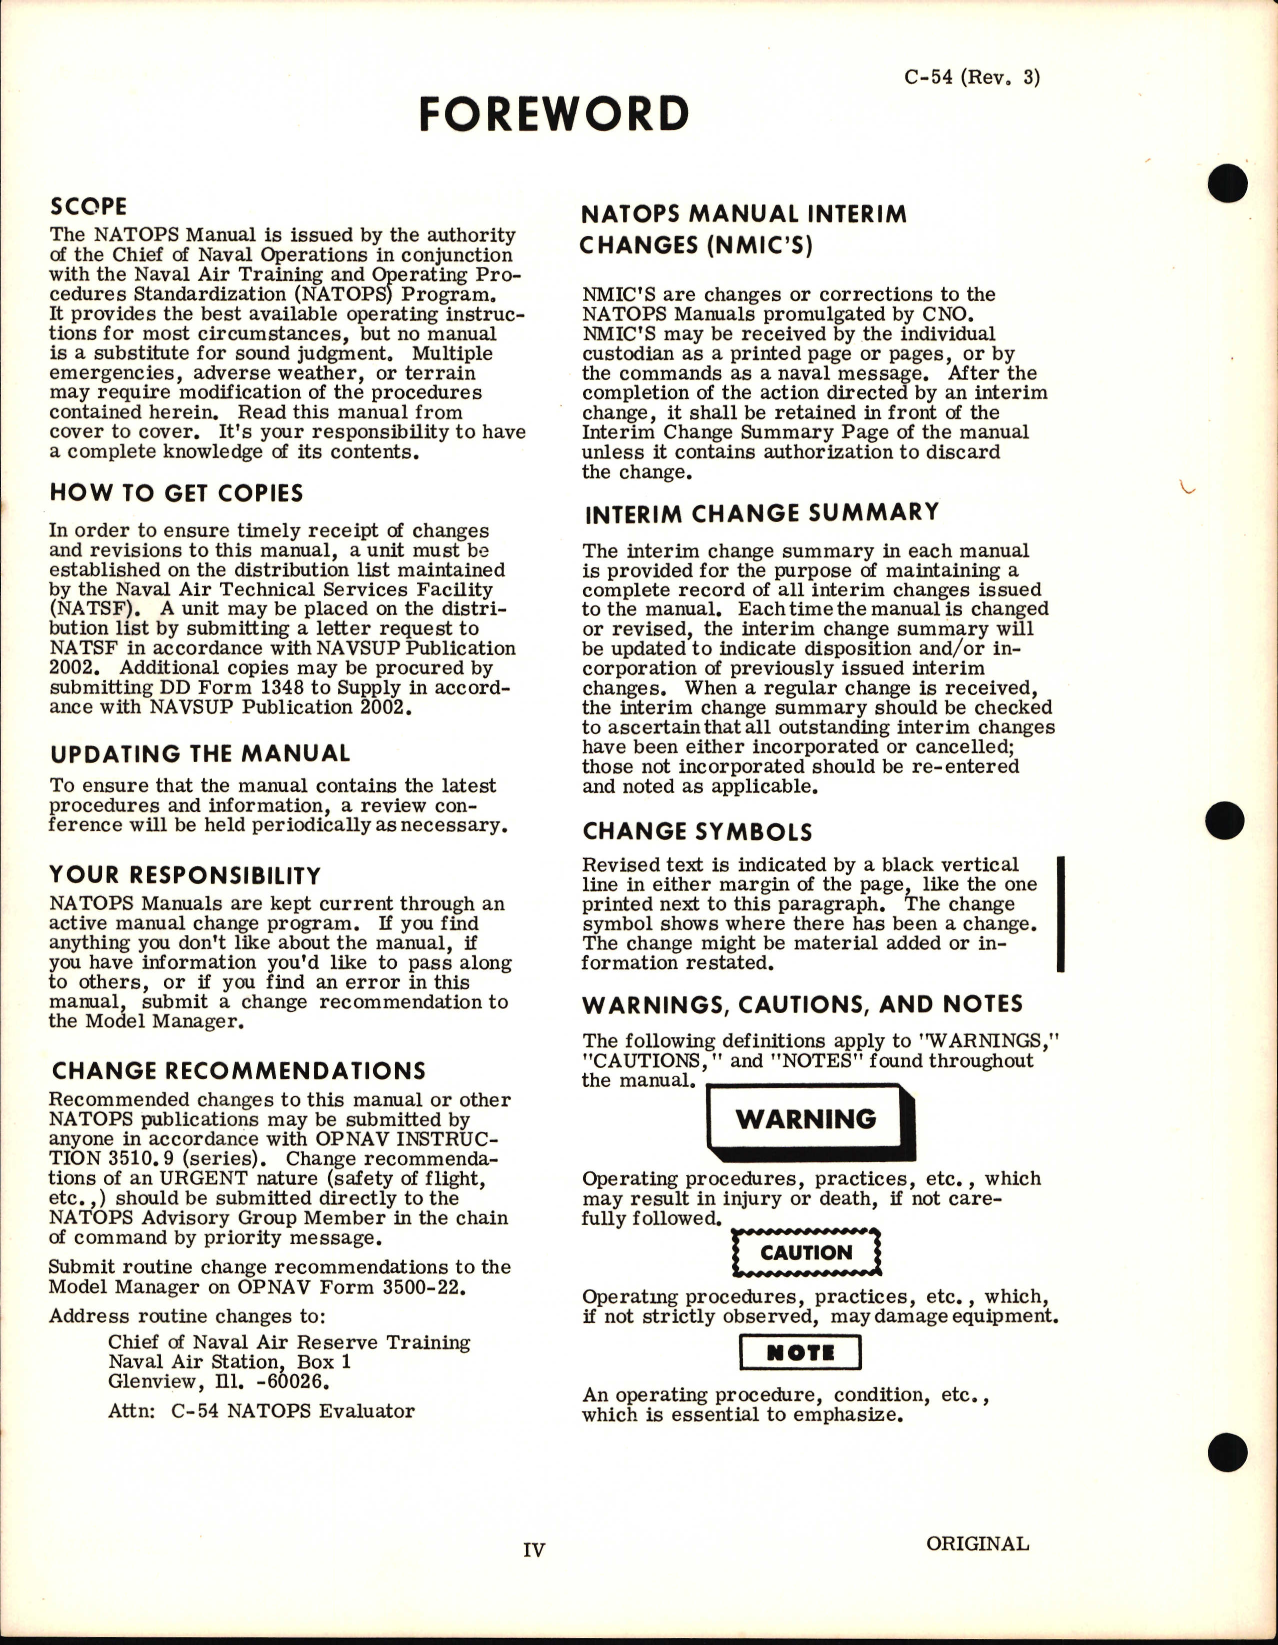 Sample page 6 from AirCorps Library document: NATOPS Manual for C-54, Third Revision